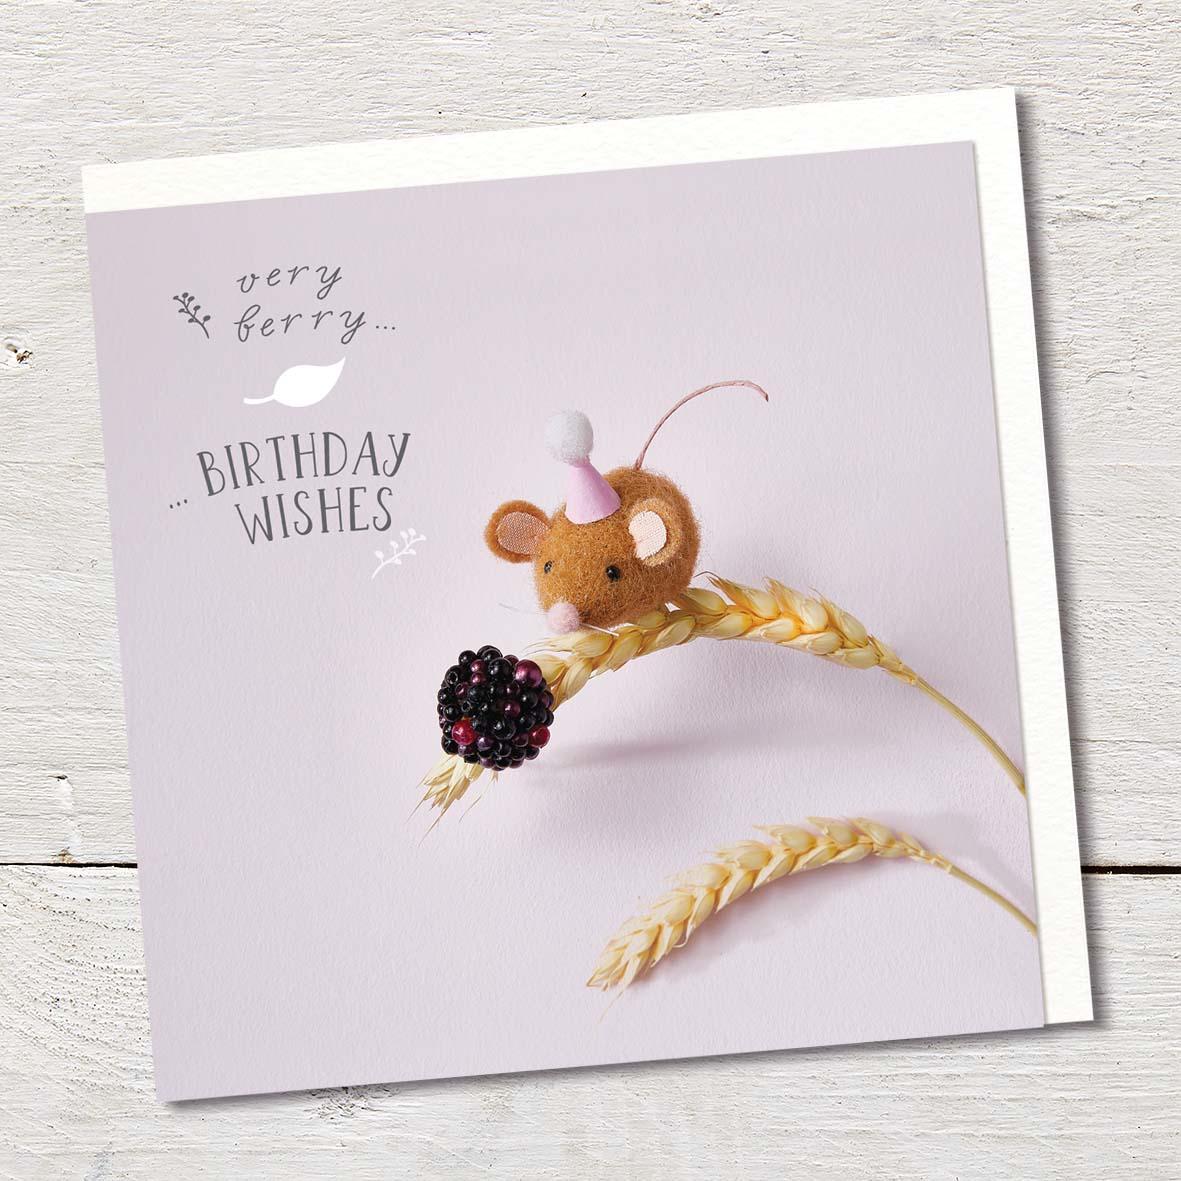 Card featuring a cute felted mouse, wearing a tiny hat, with a blackberry and sitting on wheat.